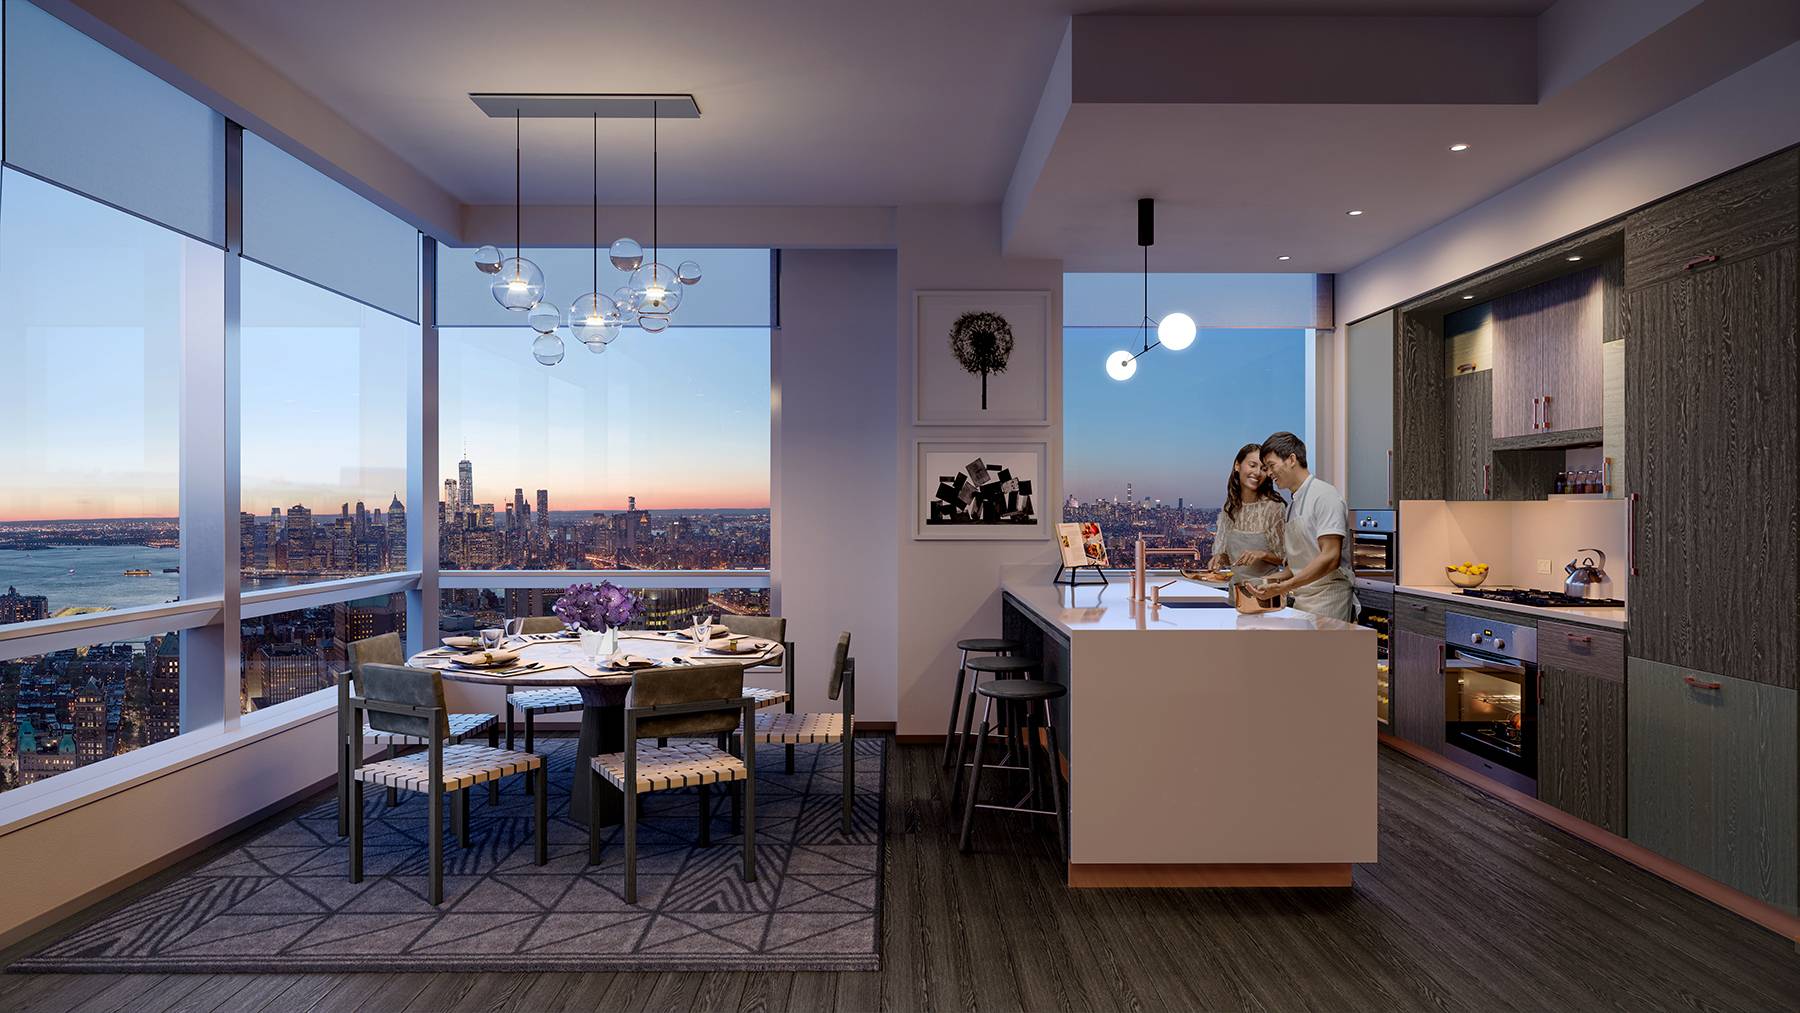 Extell Development Company presents Brooklyn Point, a new standard of luxury living in Downtown Brooklyn.